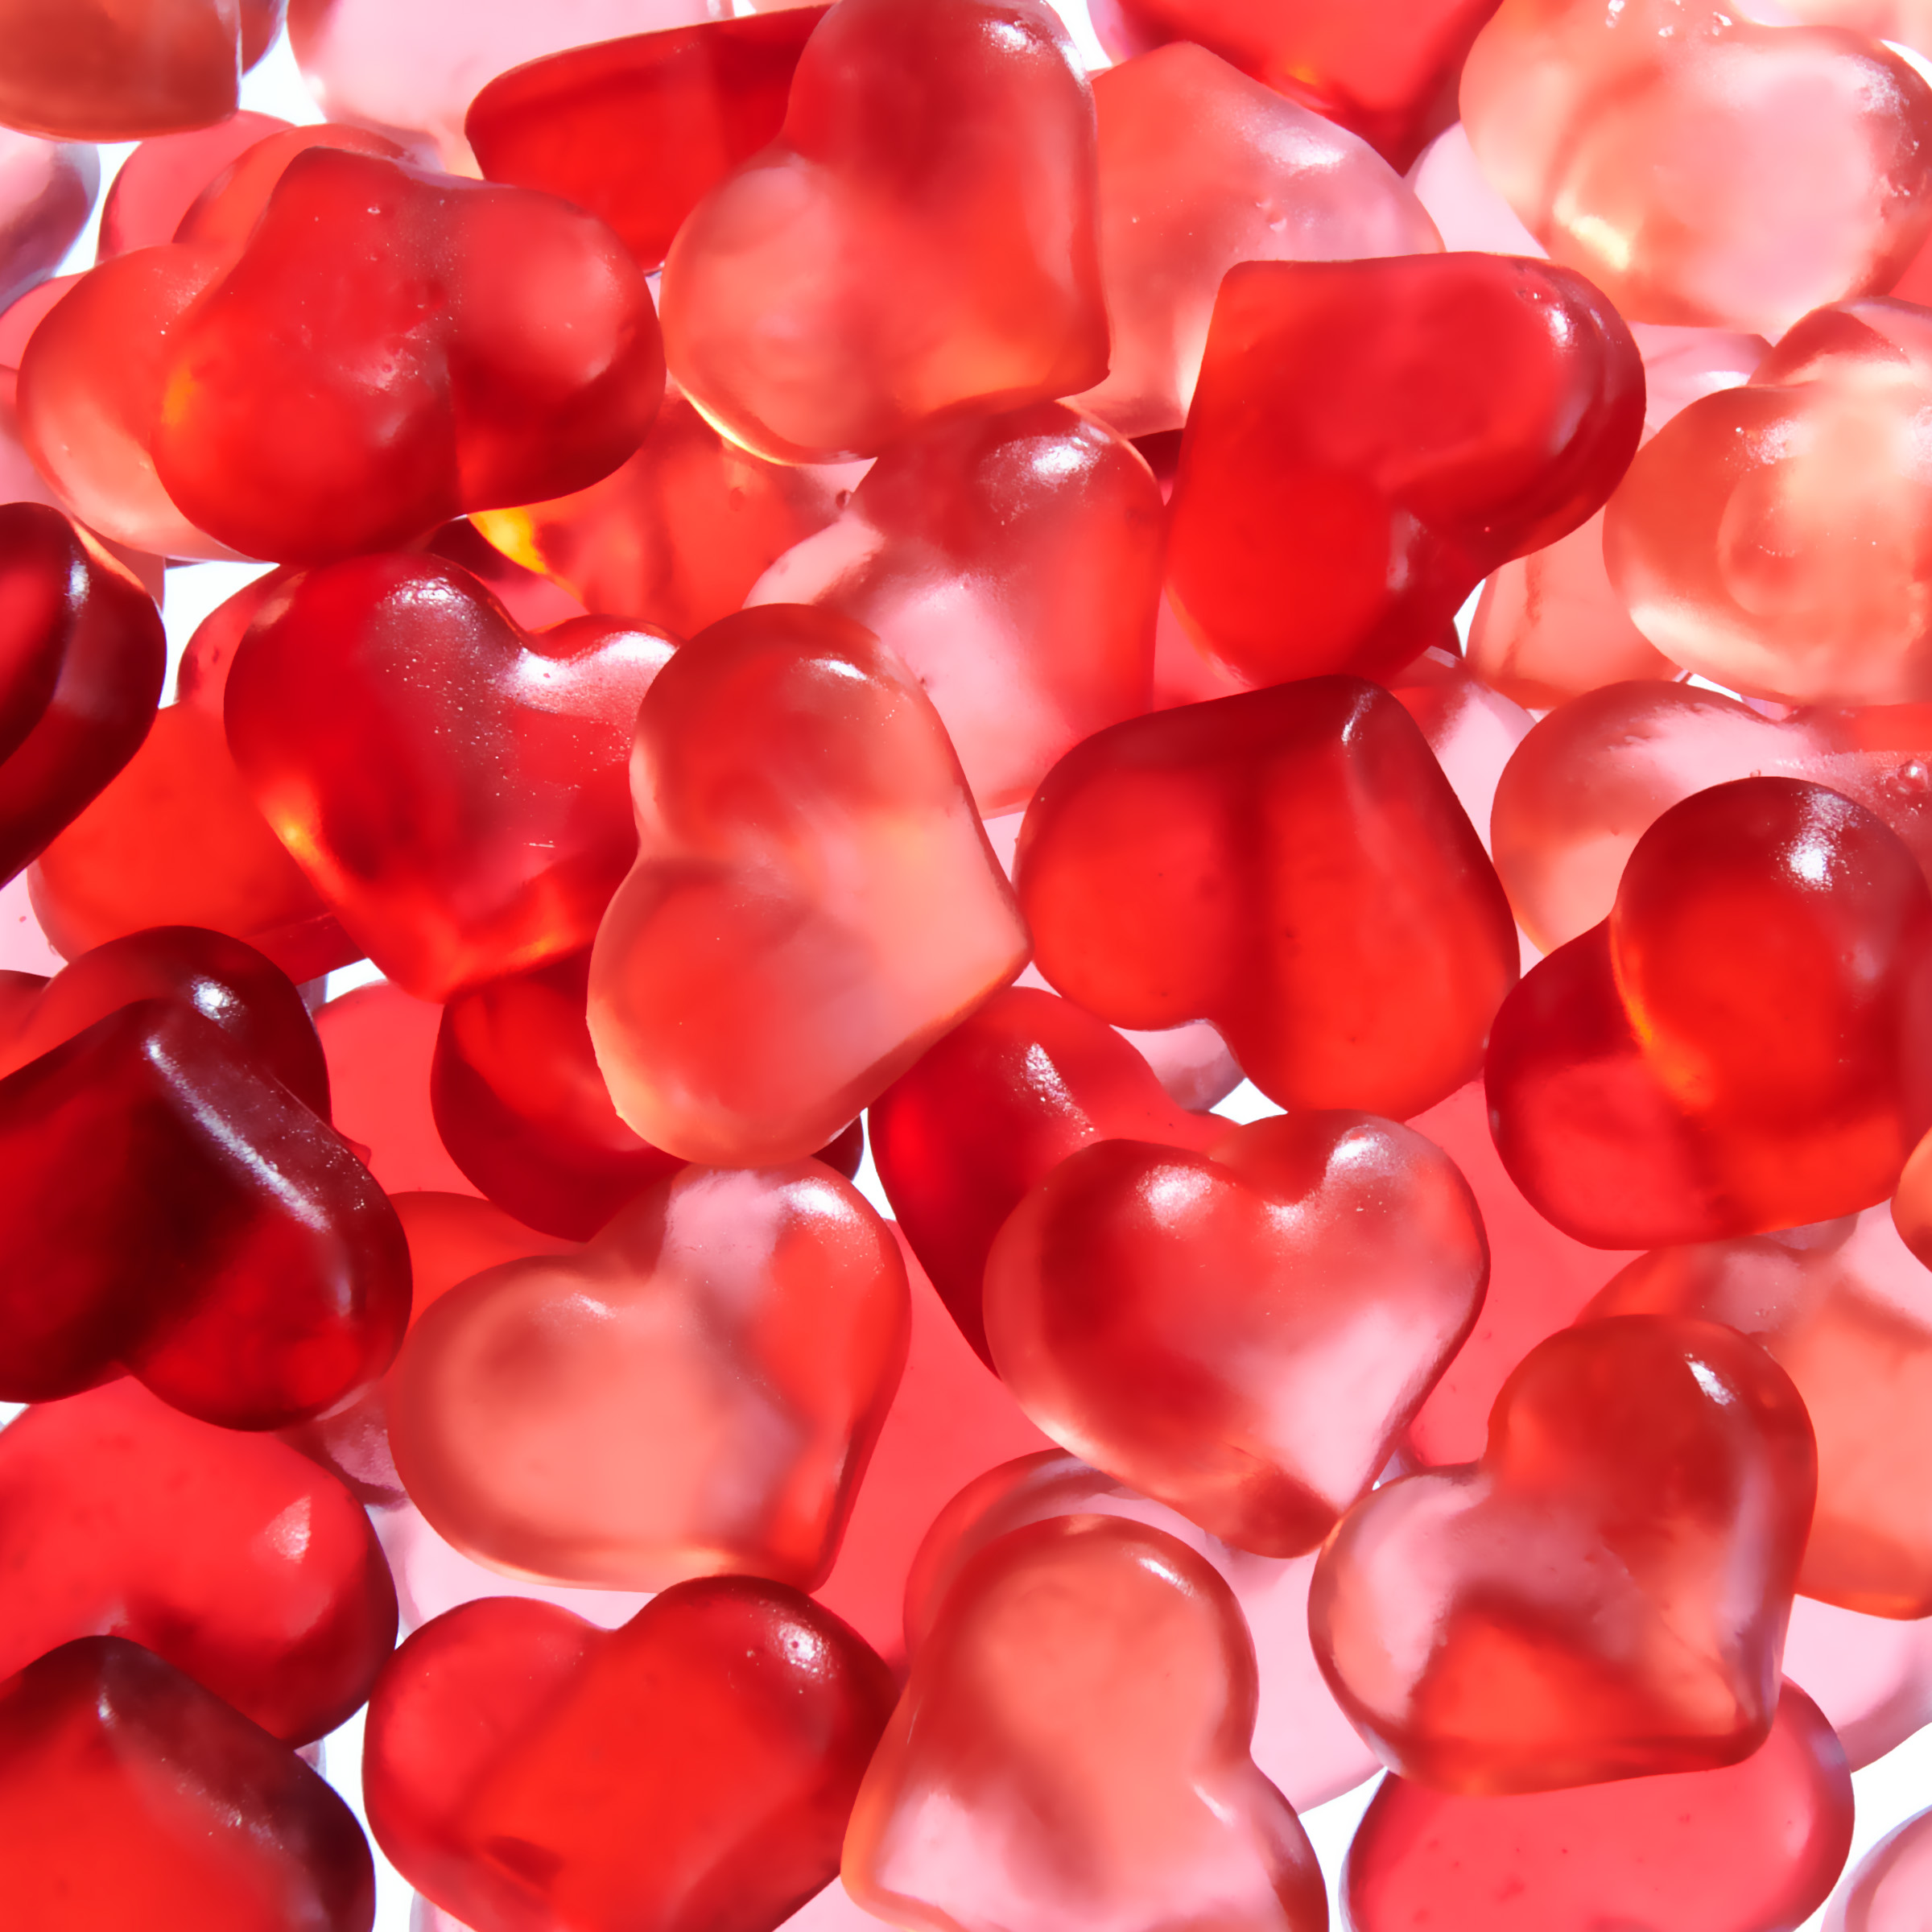 Haribo Valentine's Sweet and Sour Hearts - 4oz - image 4 of 6